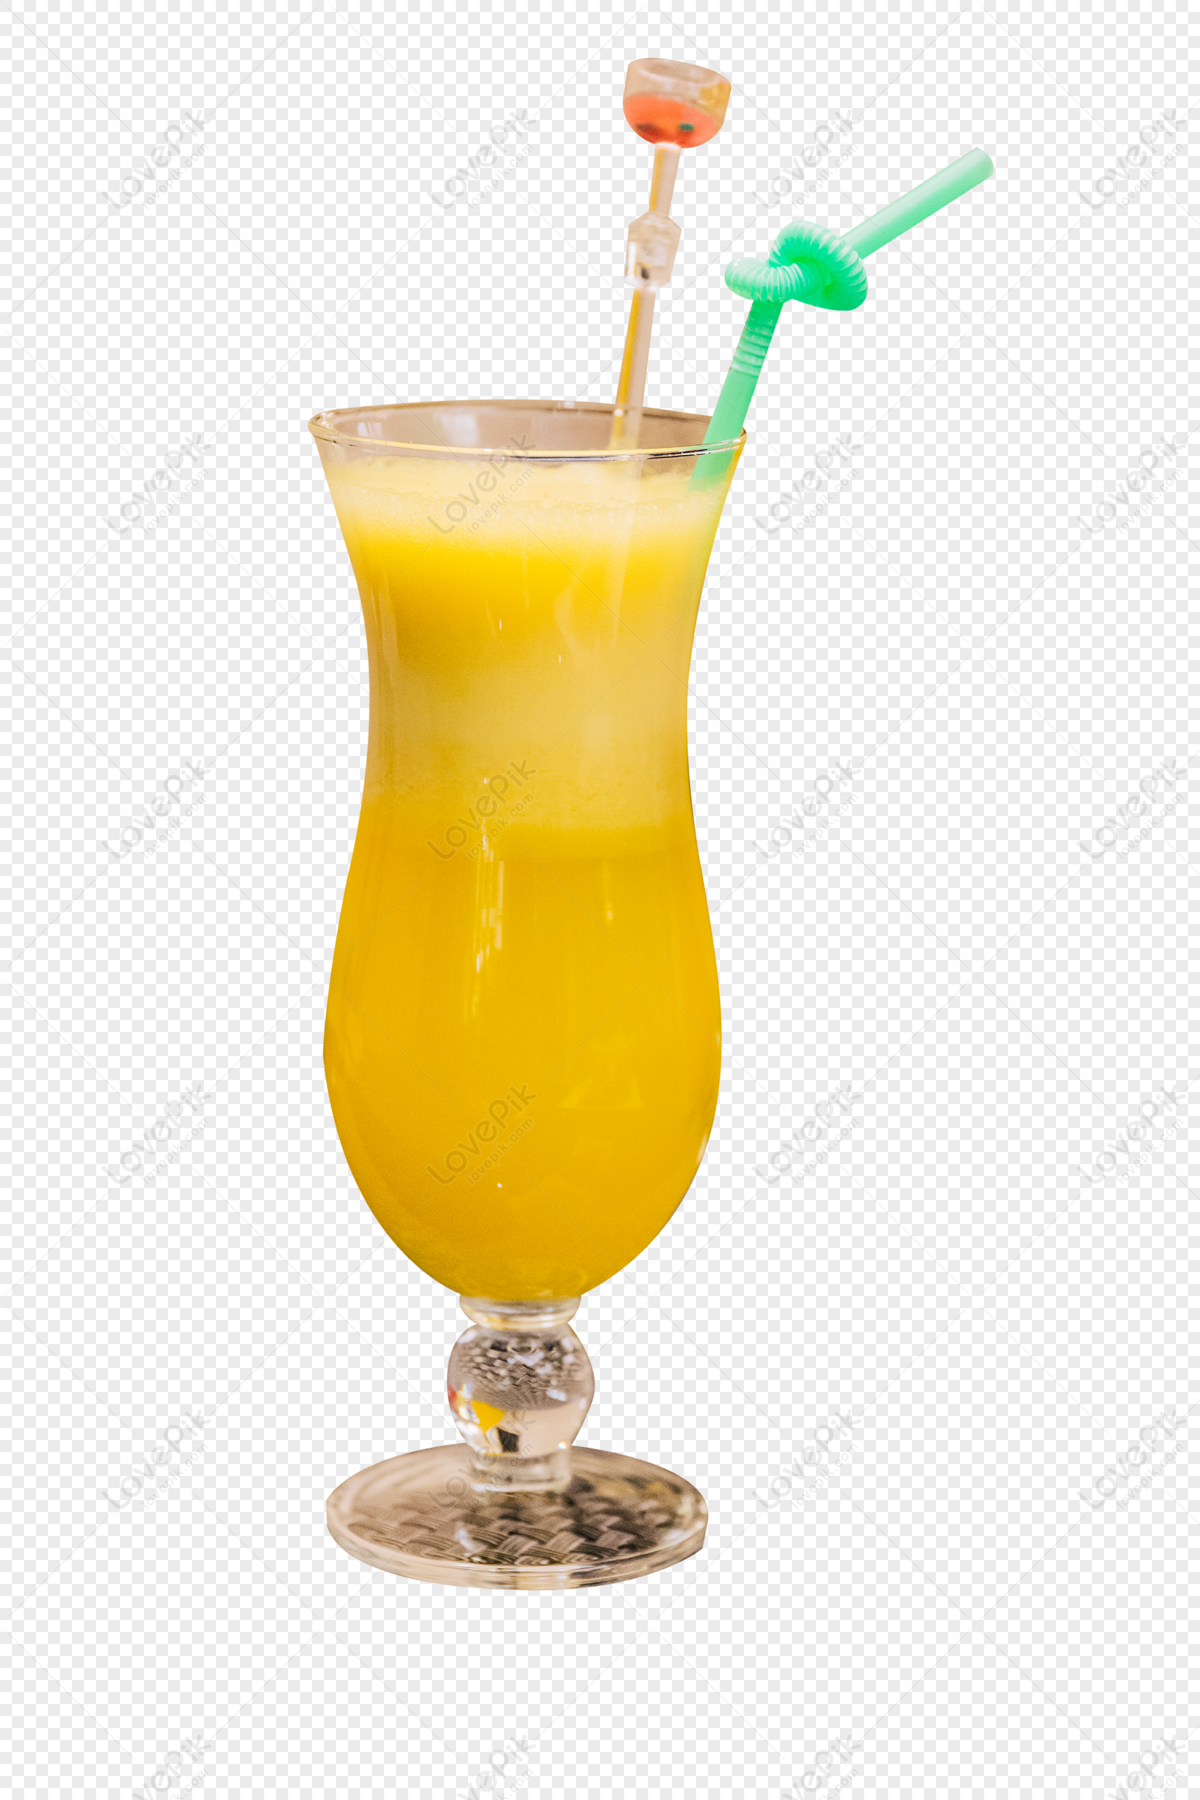 Fruit Juice PNG Transparent Background And Clipart Image For Free Download  - Lovepik | 400325340